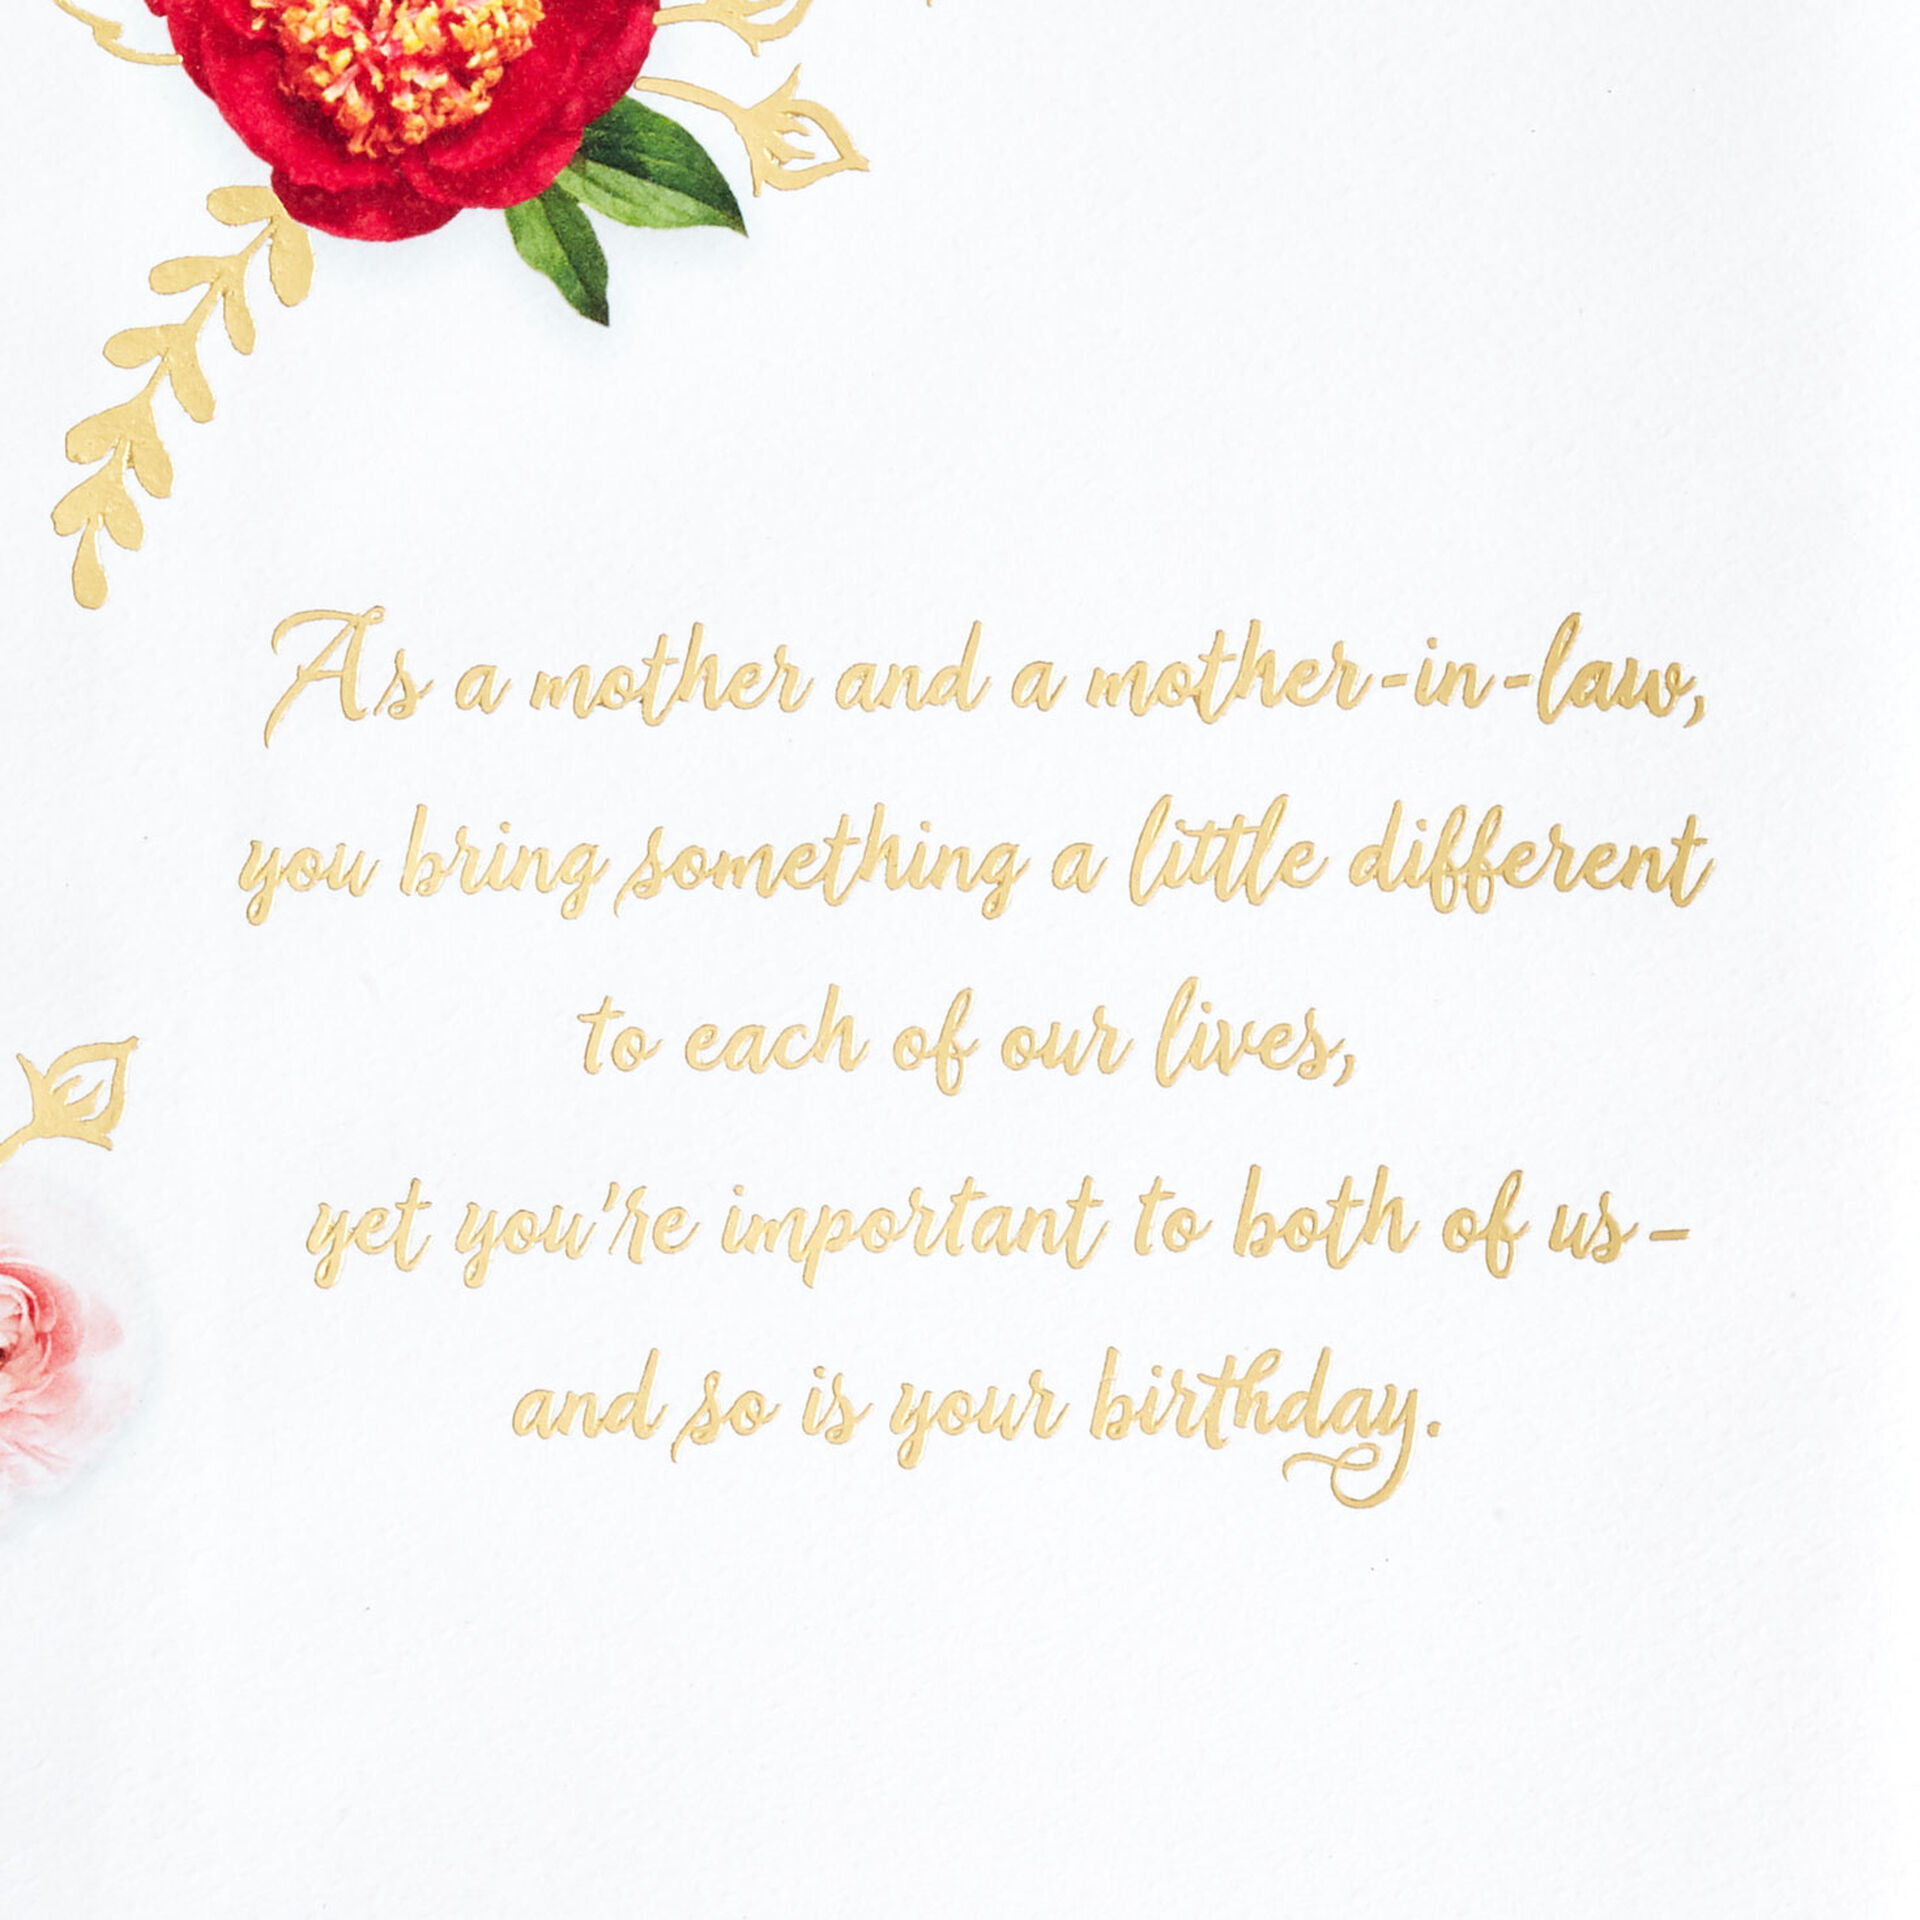 Rose-Wreath-Birthday-Card-for-Mom-From-Spouses_659FBD9301_02